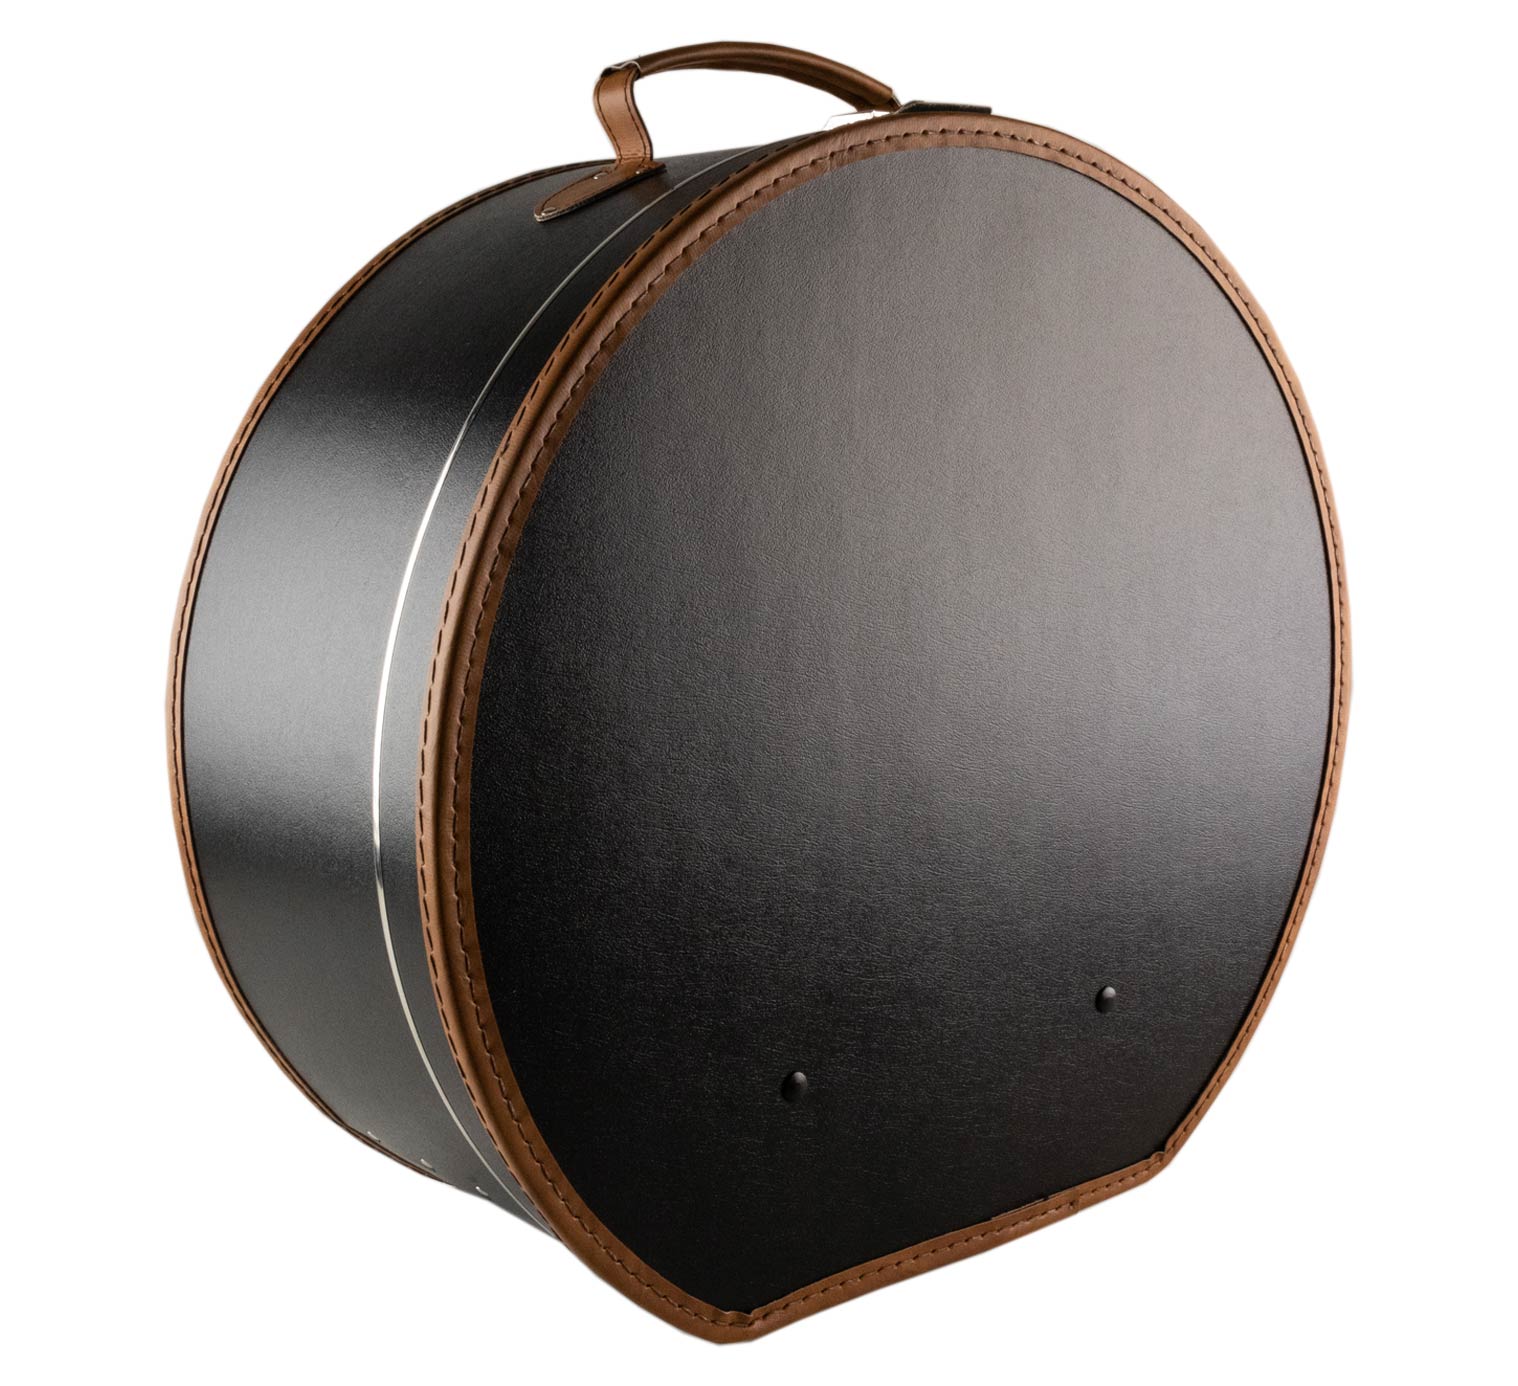 Hat box prestige brown leather - Traclet Reference : 202